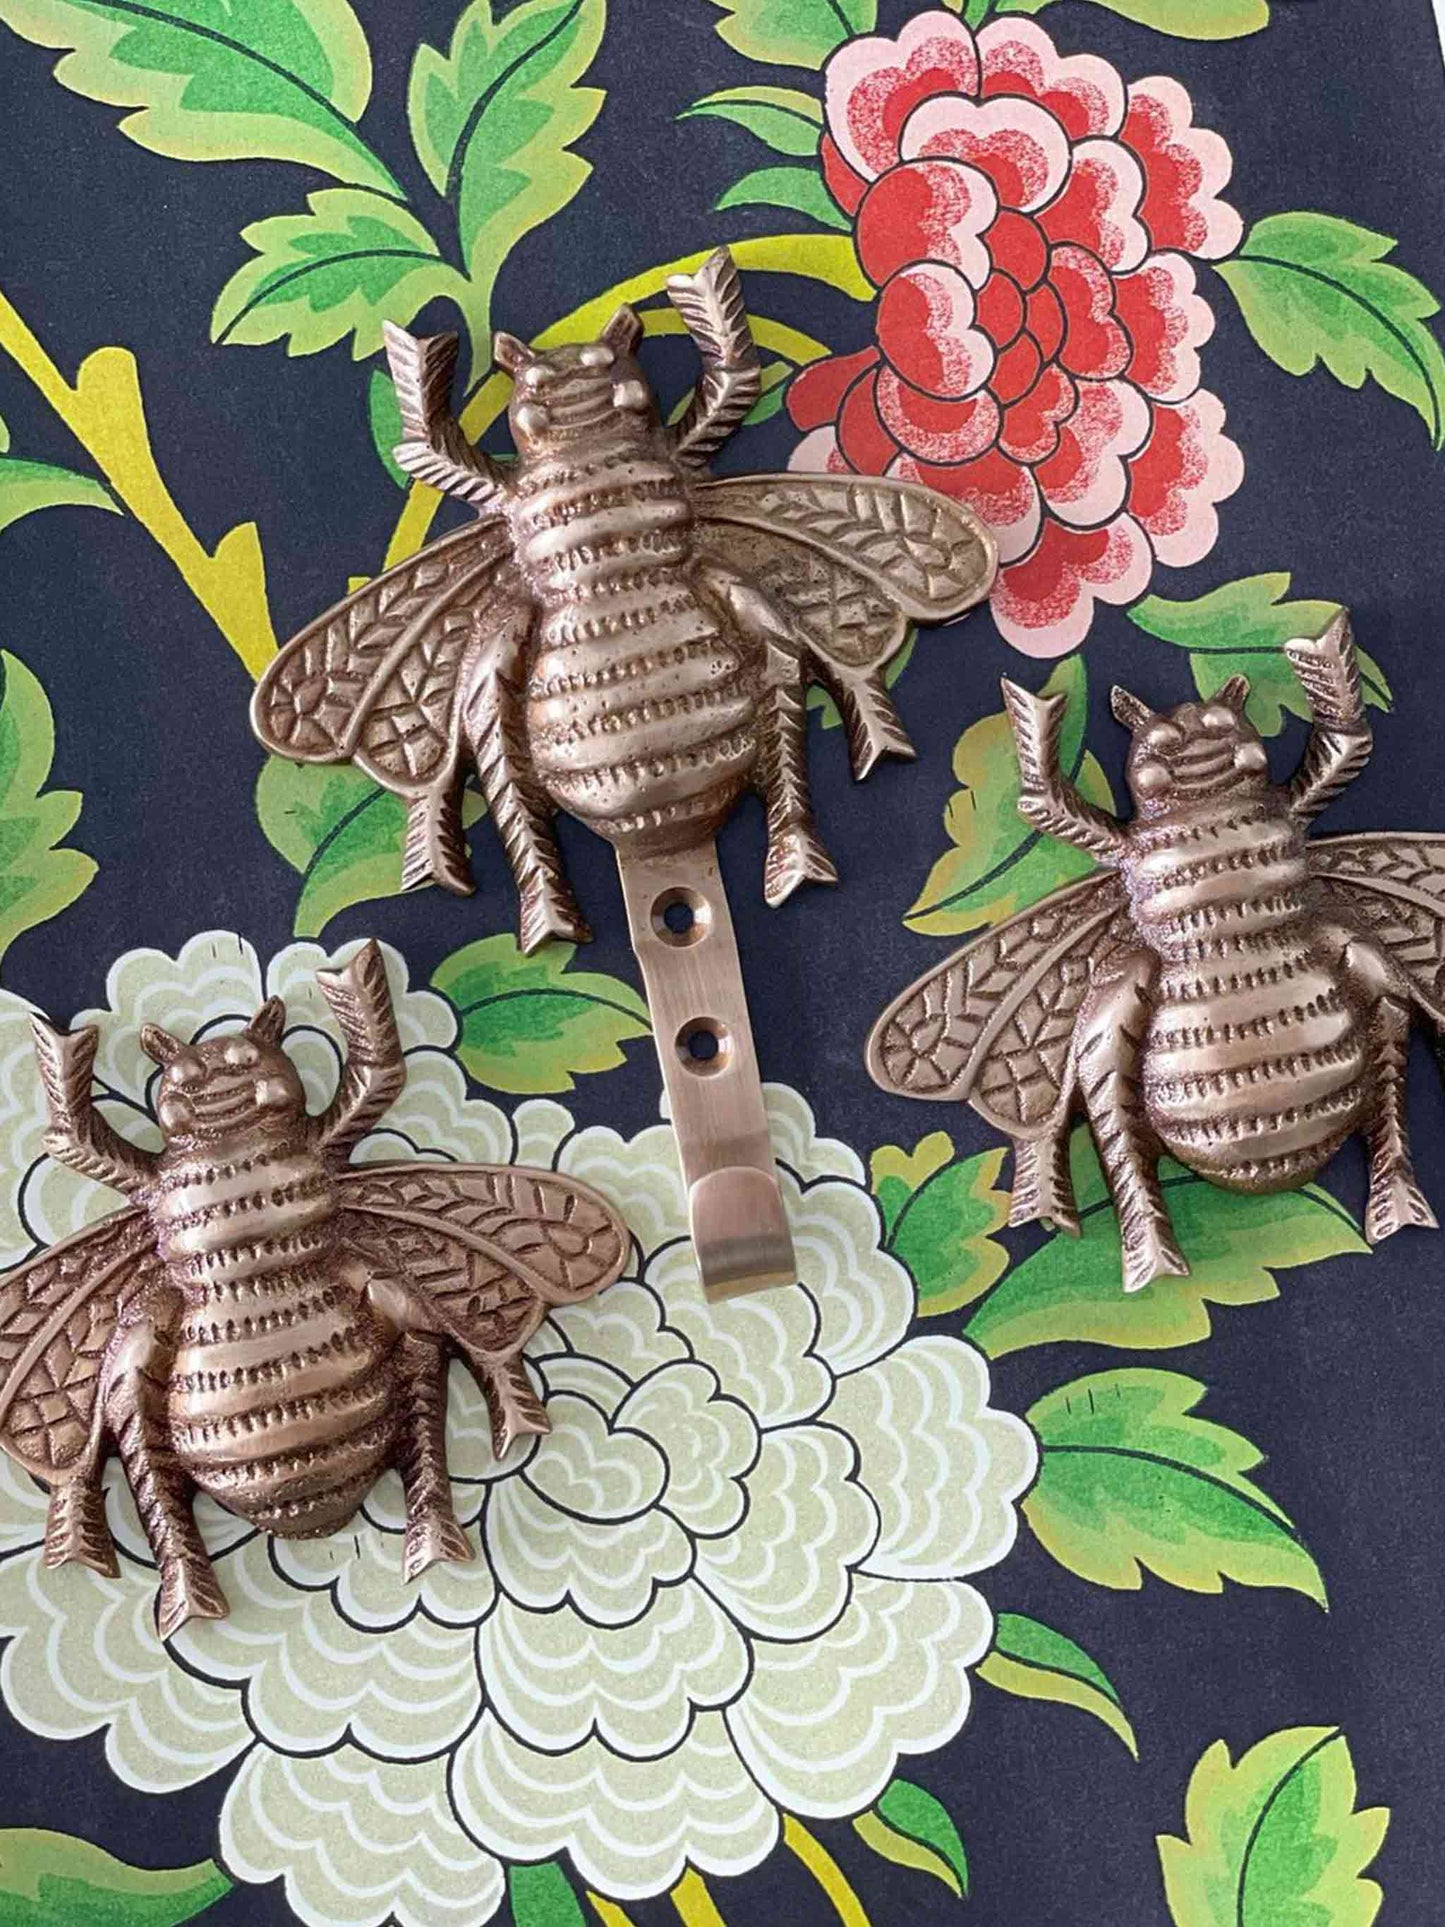 Décorative Brass Paper Weight in Abeja Bee C.A.M